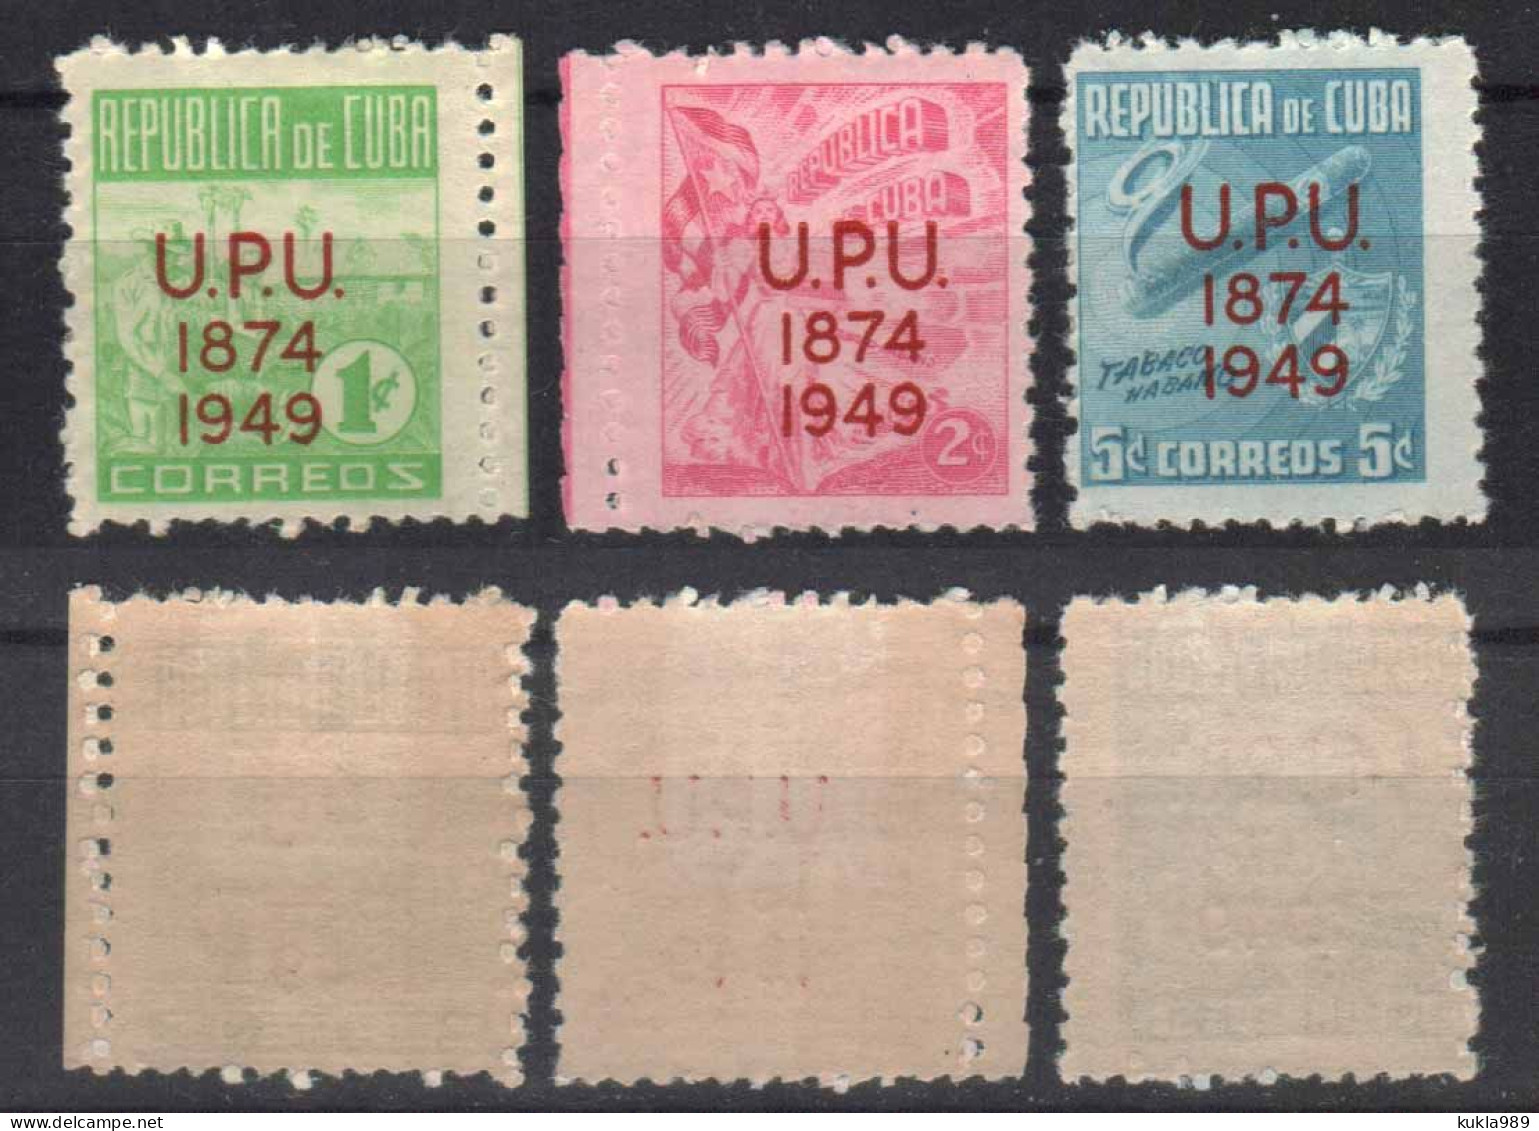 CUBA STAMPS - 1949 UPU ANNIVERSARY SET COMPLETE MLH - Neufs